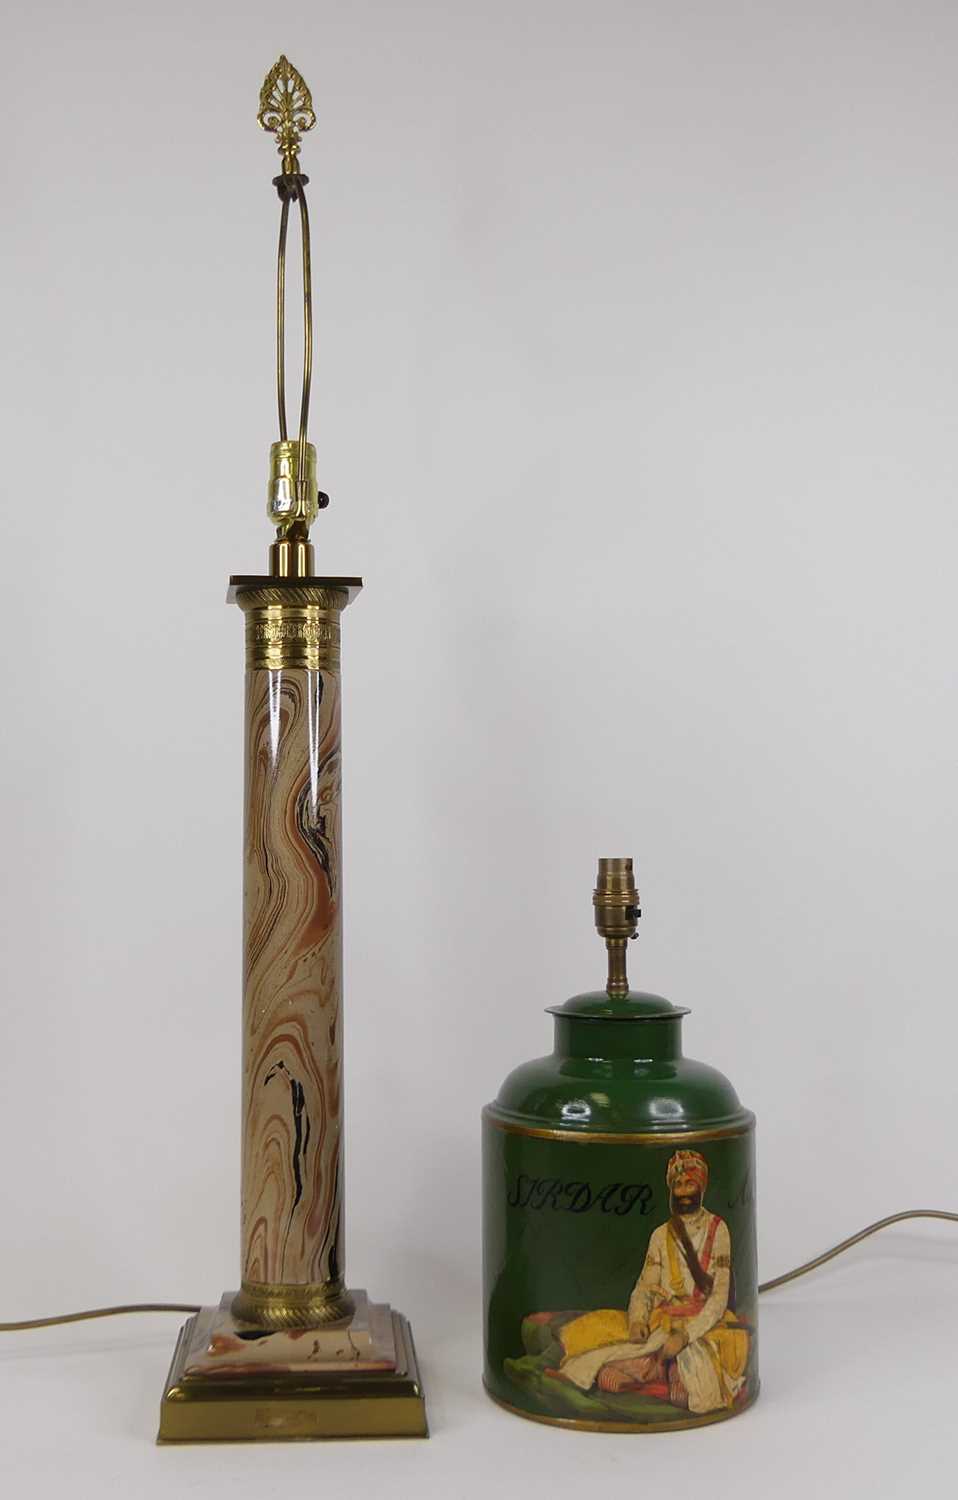 A reproduction table lamp in the form of a tea canister, height 34cm, together with a brass and faux